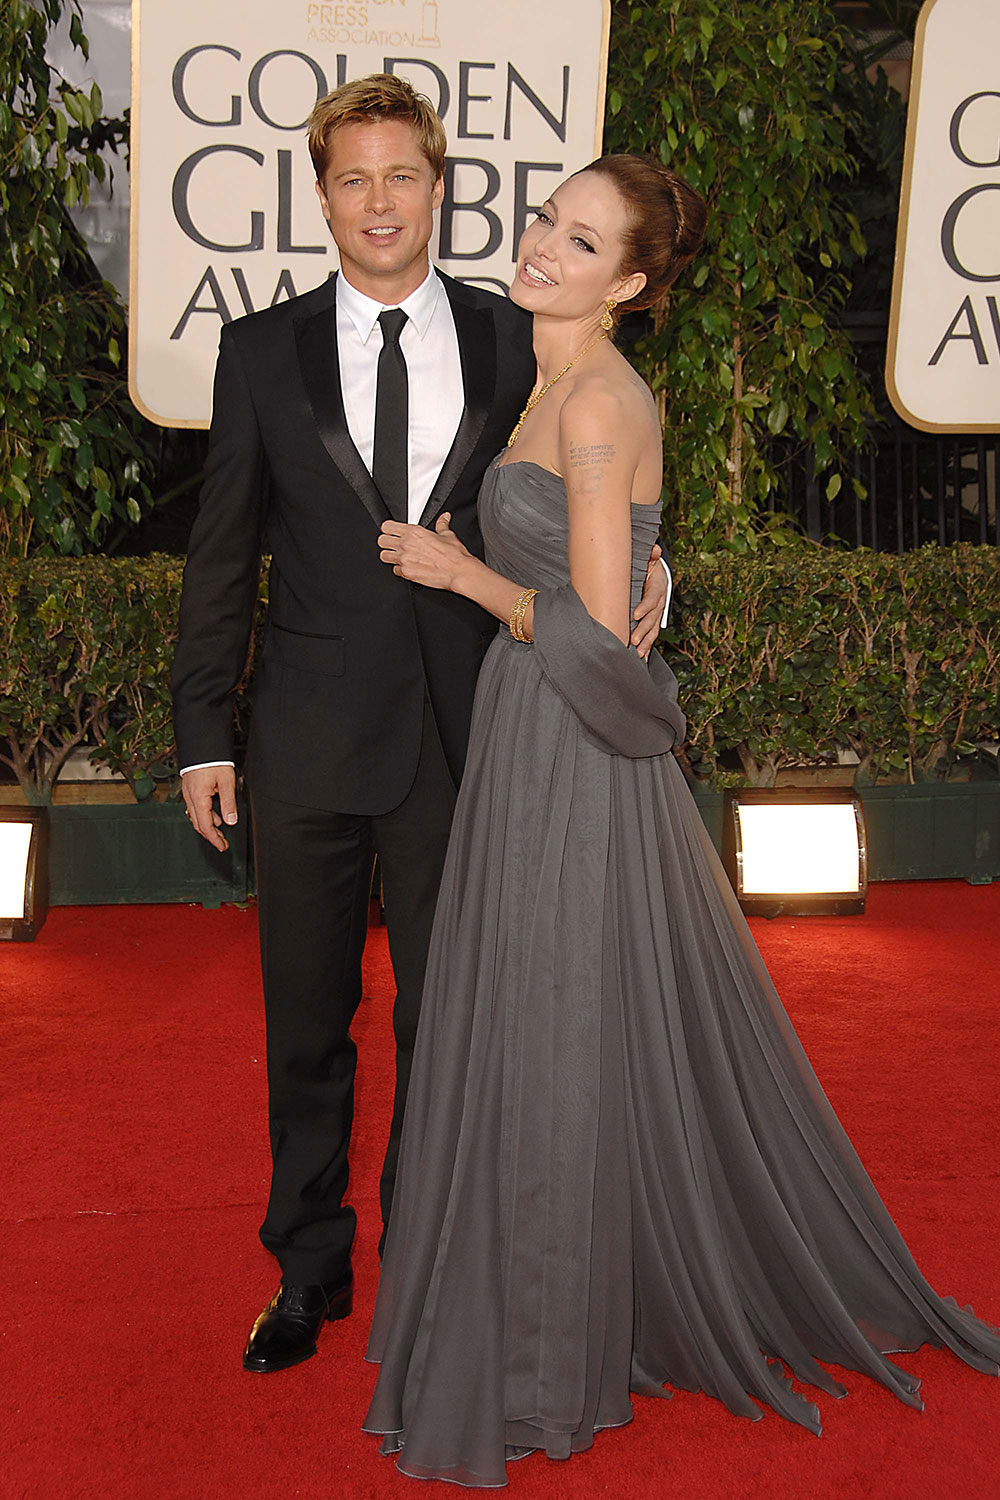 Brad Pitt and Angelina Jolie at the 64th Annual Golden Globe awards in 2007